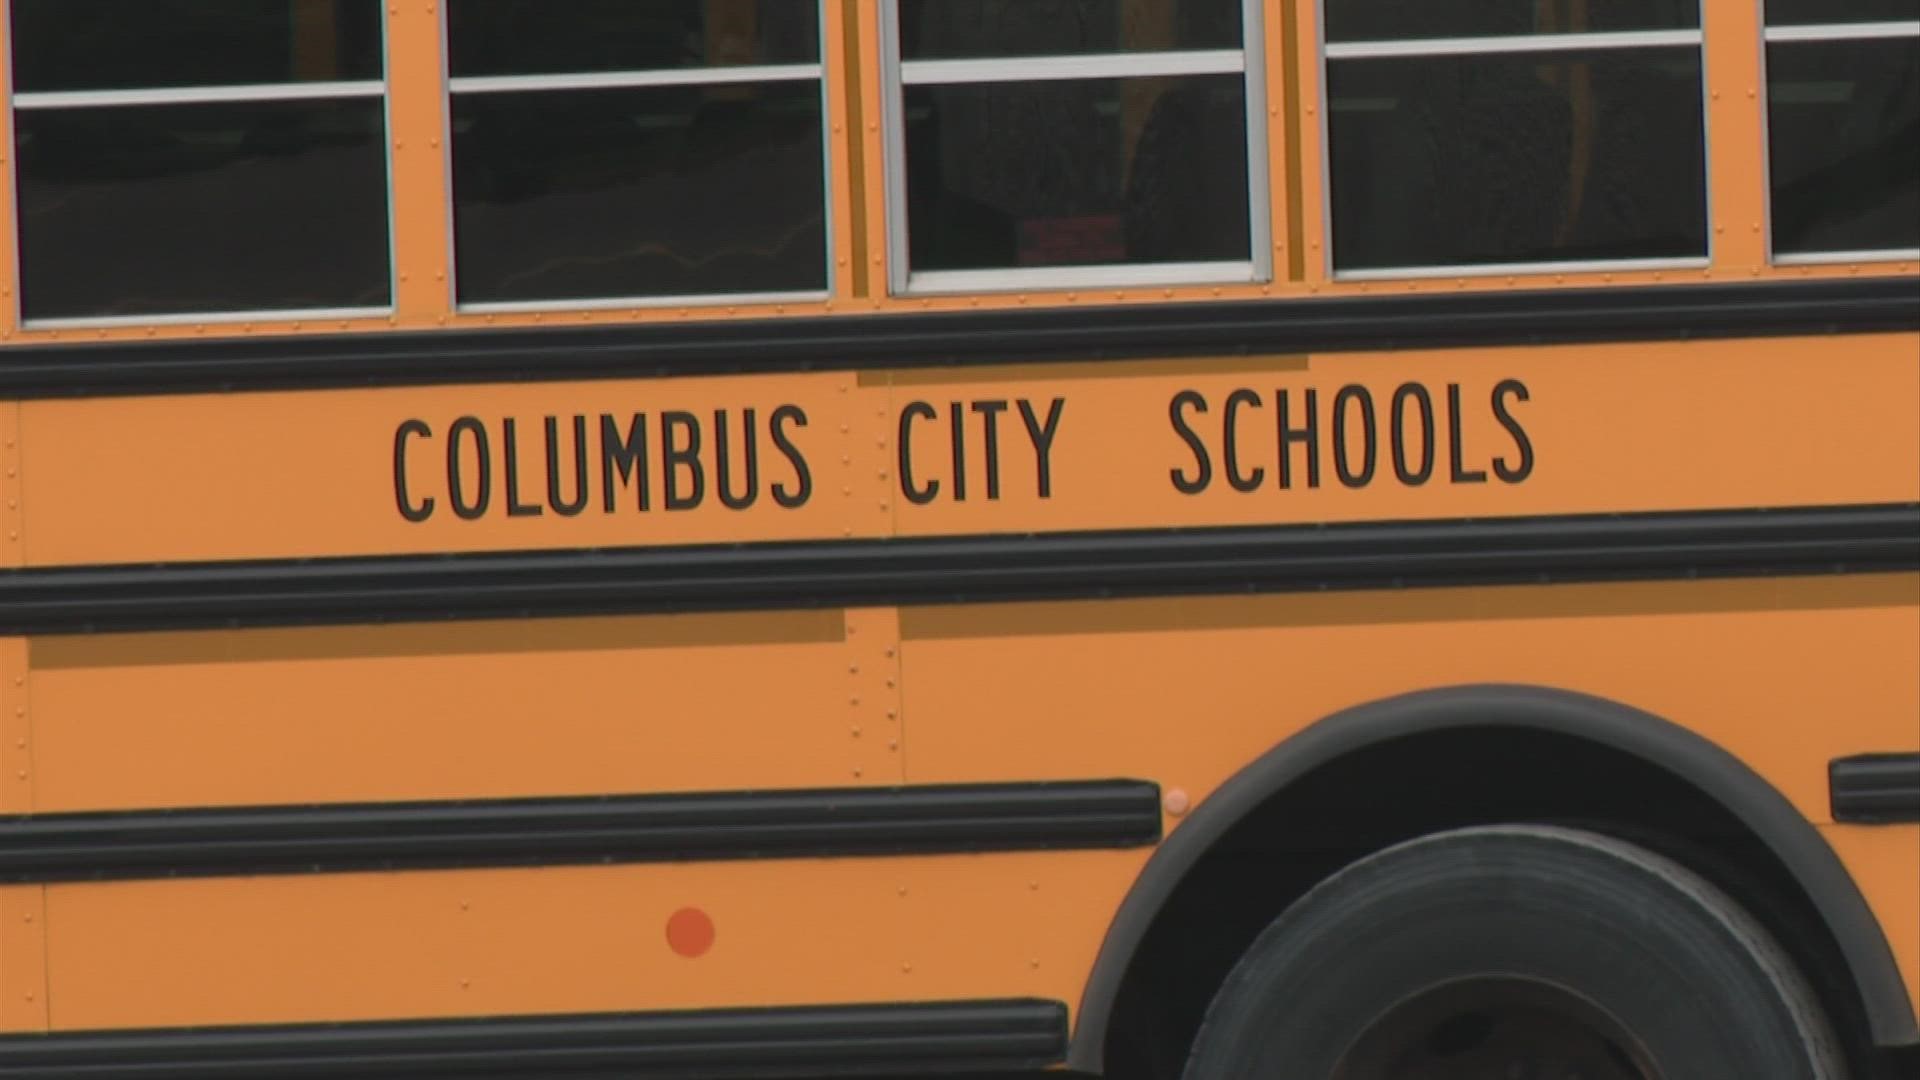 Tuesday night, Columbus City Schools Board of Education gave the the green light to millions of safety upgrades for students.